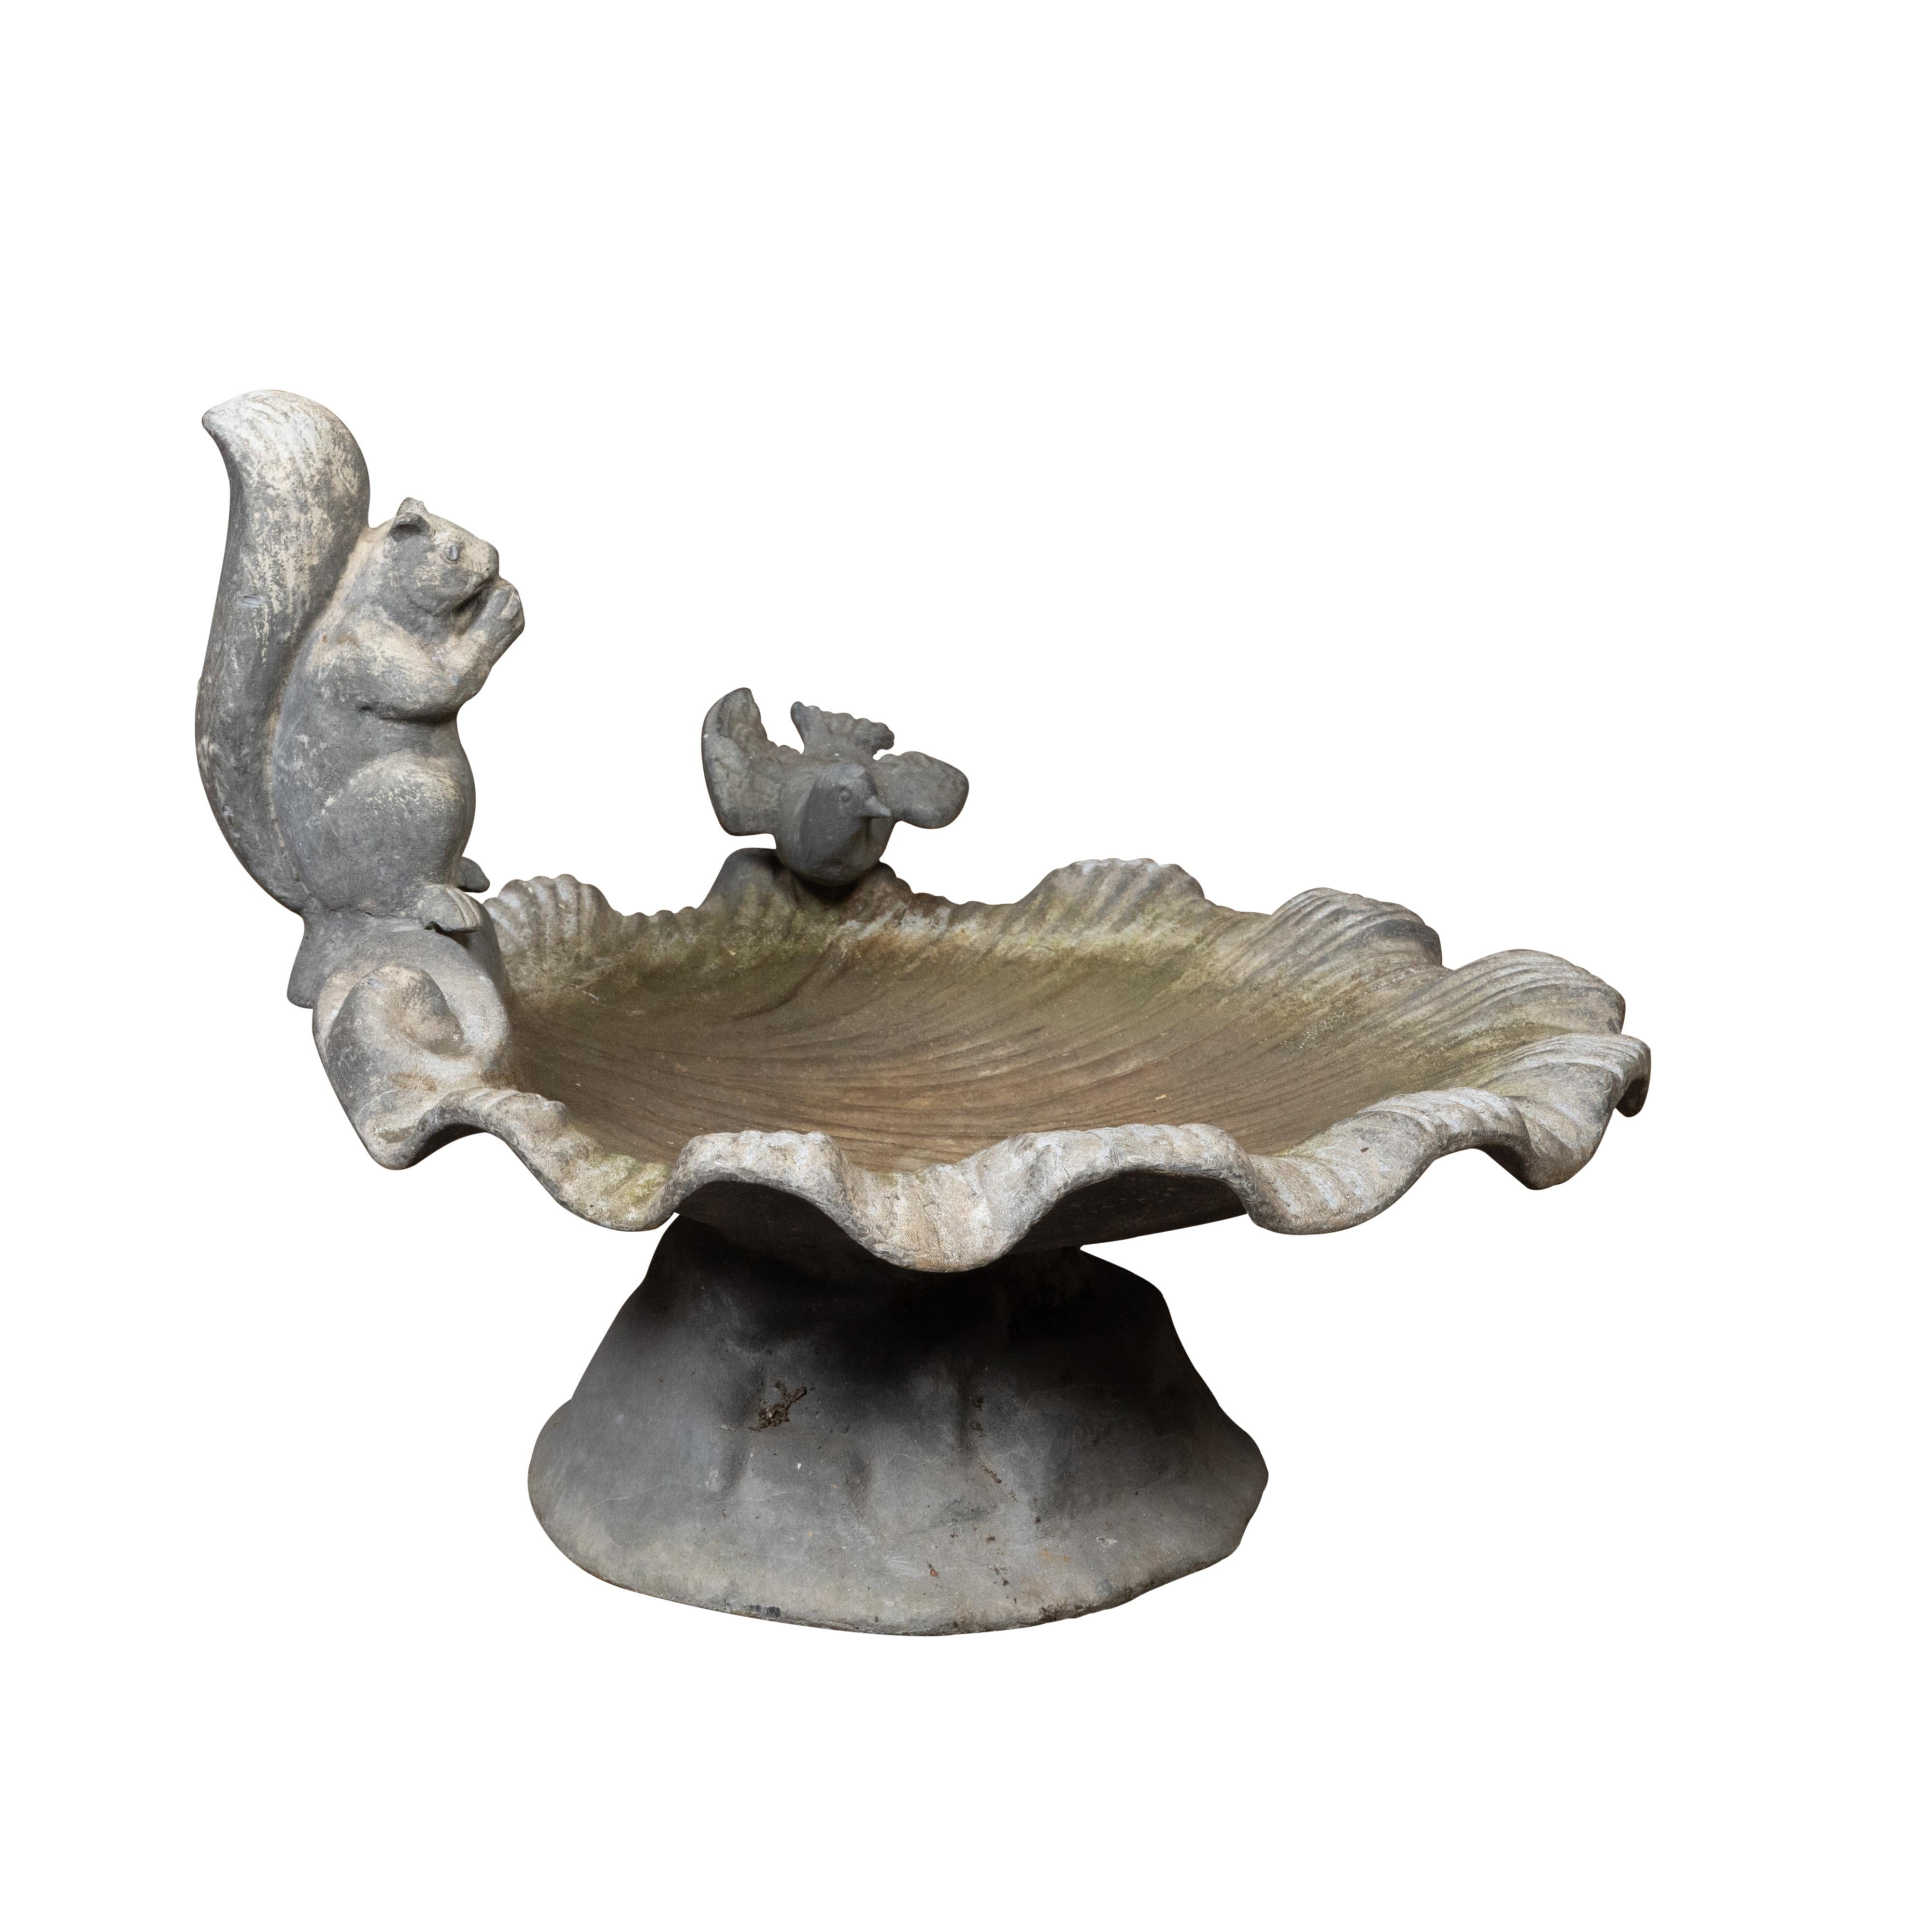 English Midcentury Lead Bird Bath Depicting a Shell with Squirrel and Bird